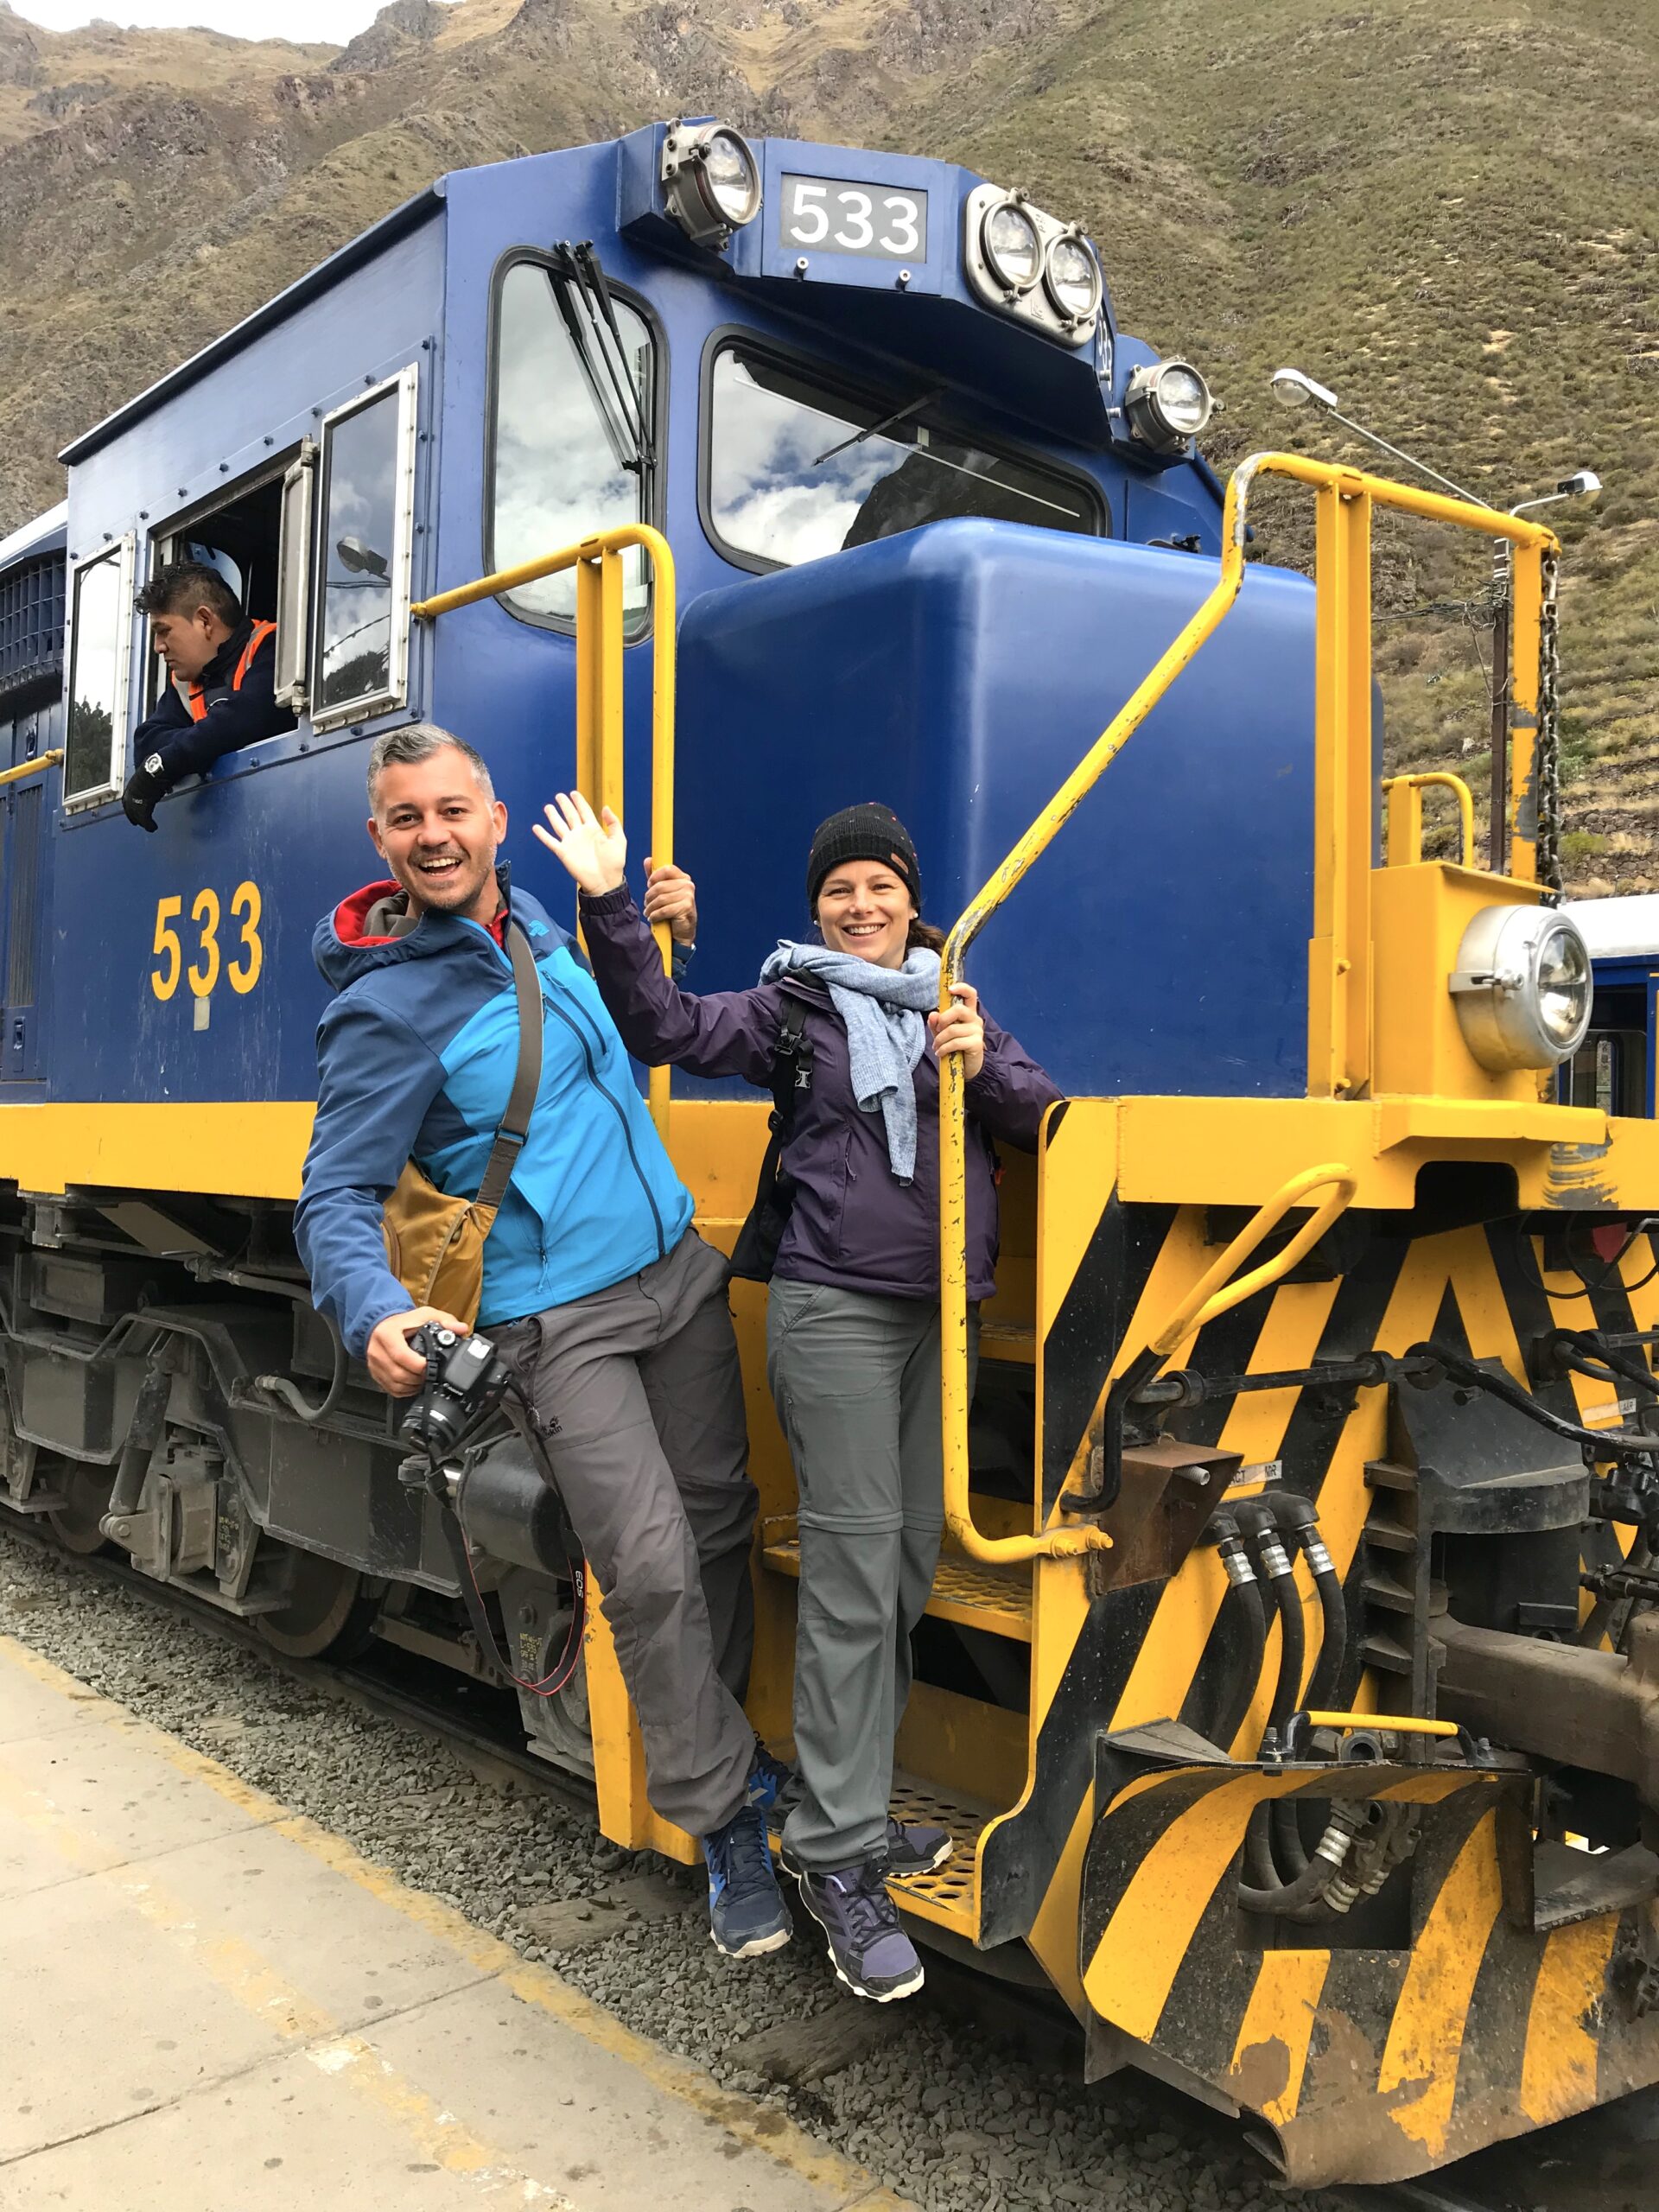 Bye bye, we are going to Machu Picchu on the Inca Rail